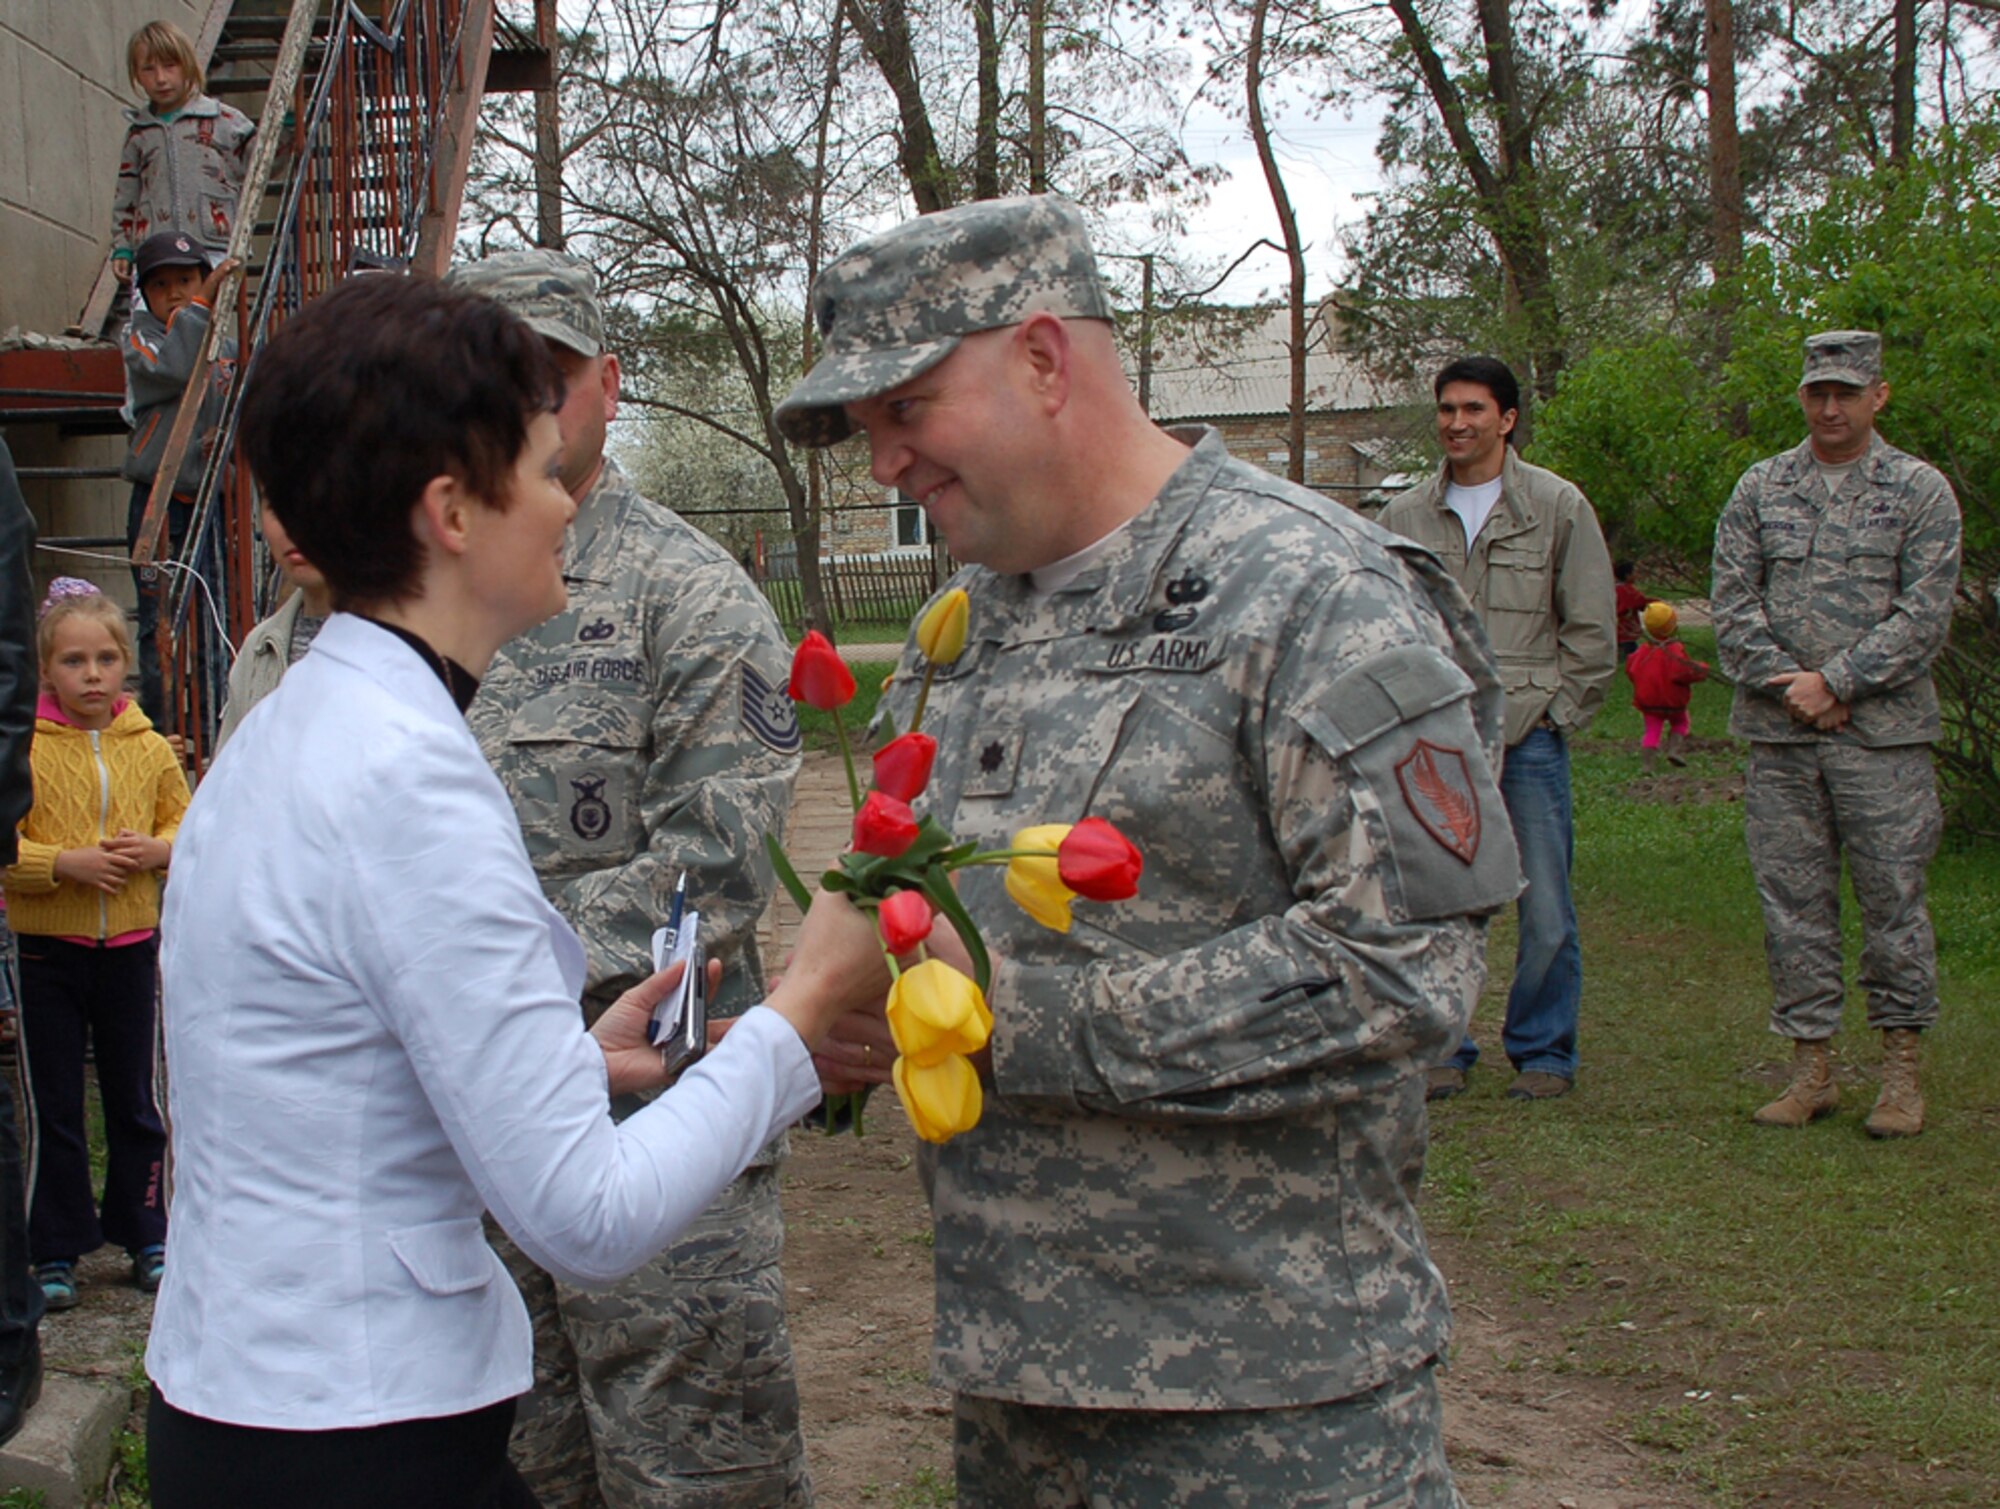 During a ground-breaking ceremony held April 14 for a renovation project at Birdik Village School in Kyrgyzstan, Olga Voroshihina, the school?s principal, gives freshly picked tulips to Lt. Col. Patrick Crabb, chief of the U.S. Embassy's Office of Military Cooperation, to thank him for his unwavering efforts over the past several years to secure funding for a $470,000 school renovation project and help ensure it became a reality. Scheduled for completion in Autumn 2009, the renovated school will house 200 students. (U.S. Air Force photo/Tech. Sgt. Phyllis Hanson)